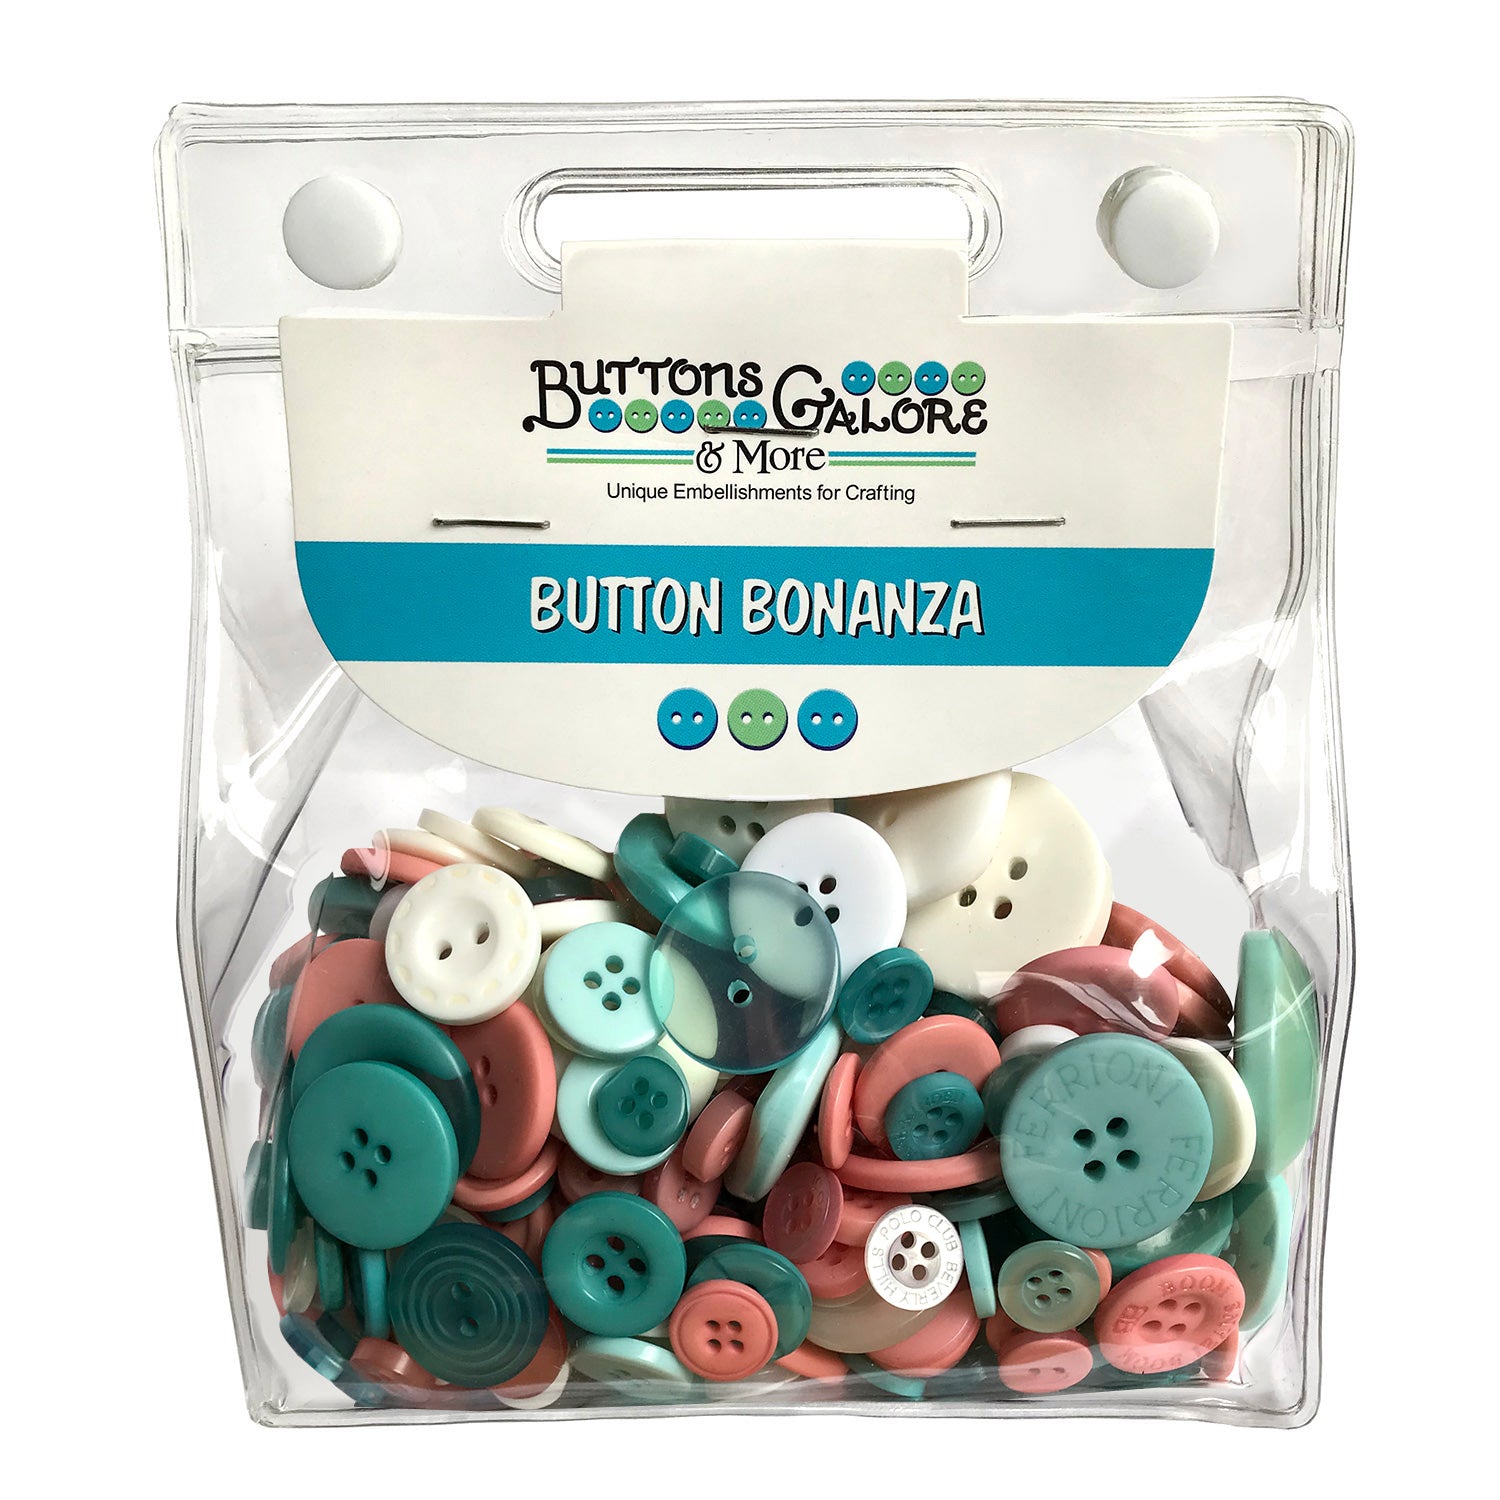 BEDEONE 1000 Pcs Assorted Buttons for Crafts, Resin Buttons for Sewing,  Craft Buttons for Decor - Mixed Color Assorted Sizes Buttons for Craft 